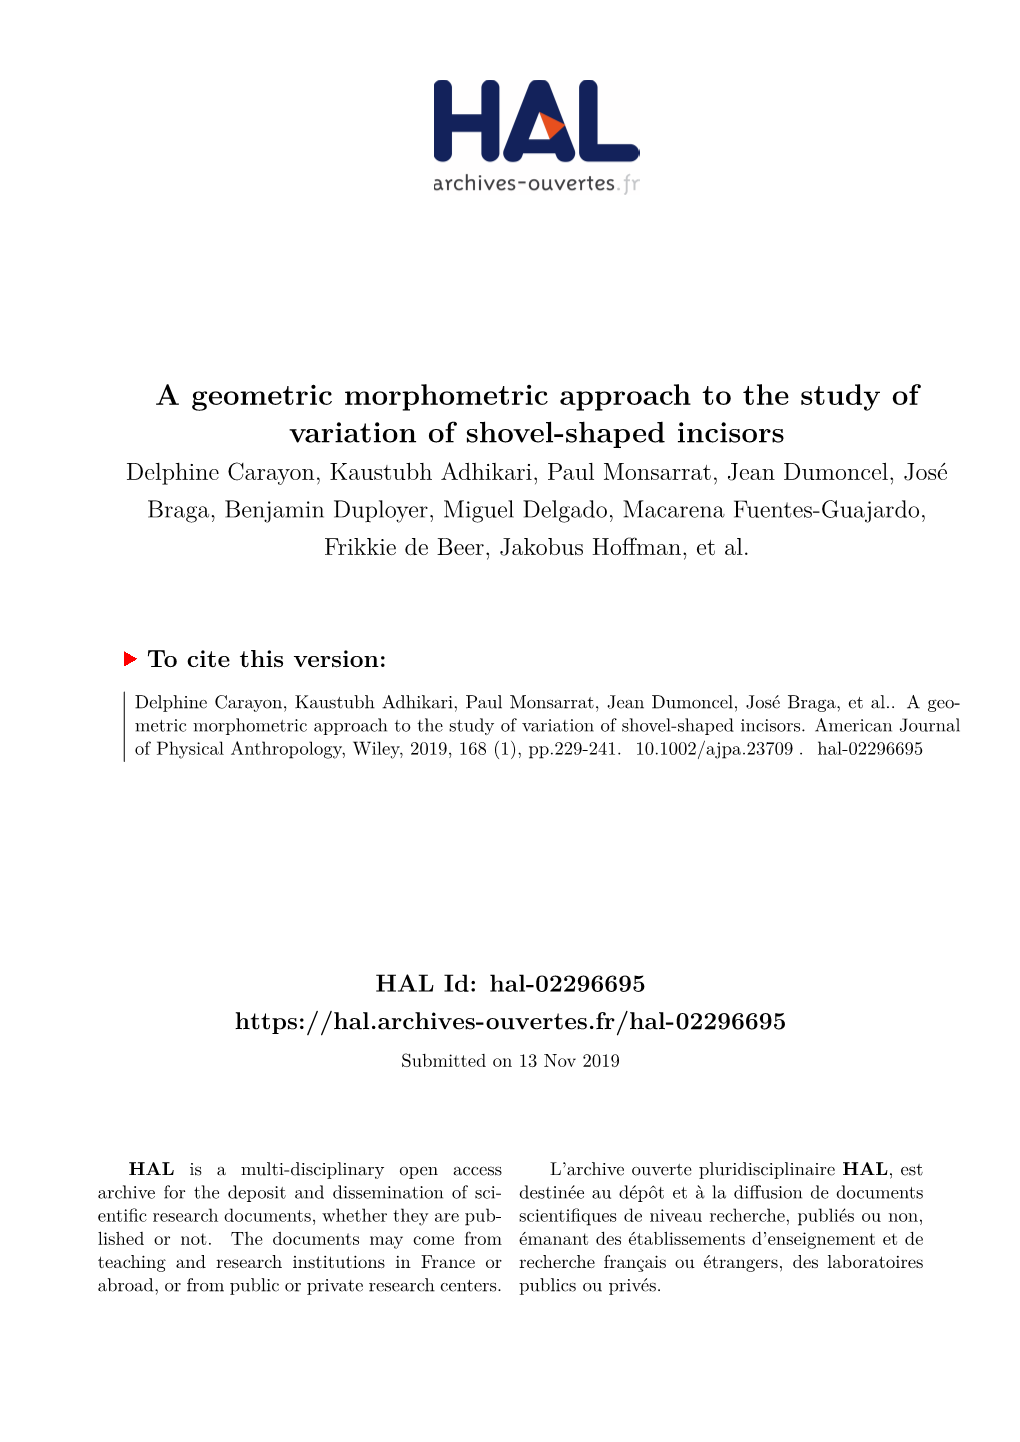 A Geometric Morphometric Approach to the Study of Variation of Shovel